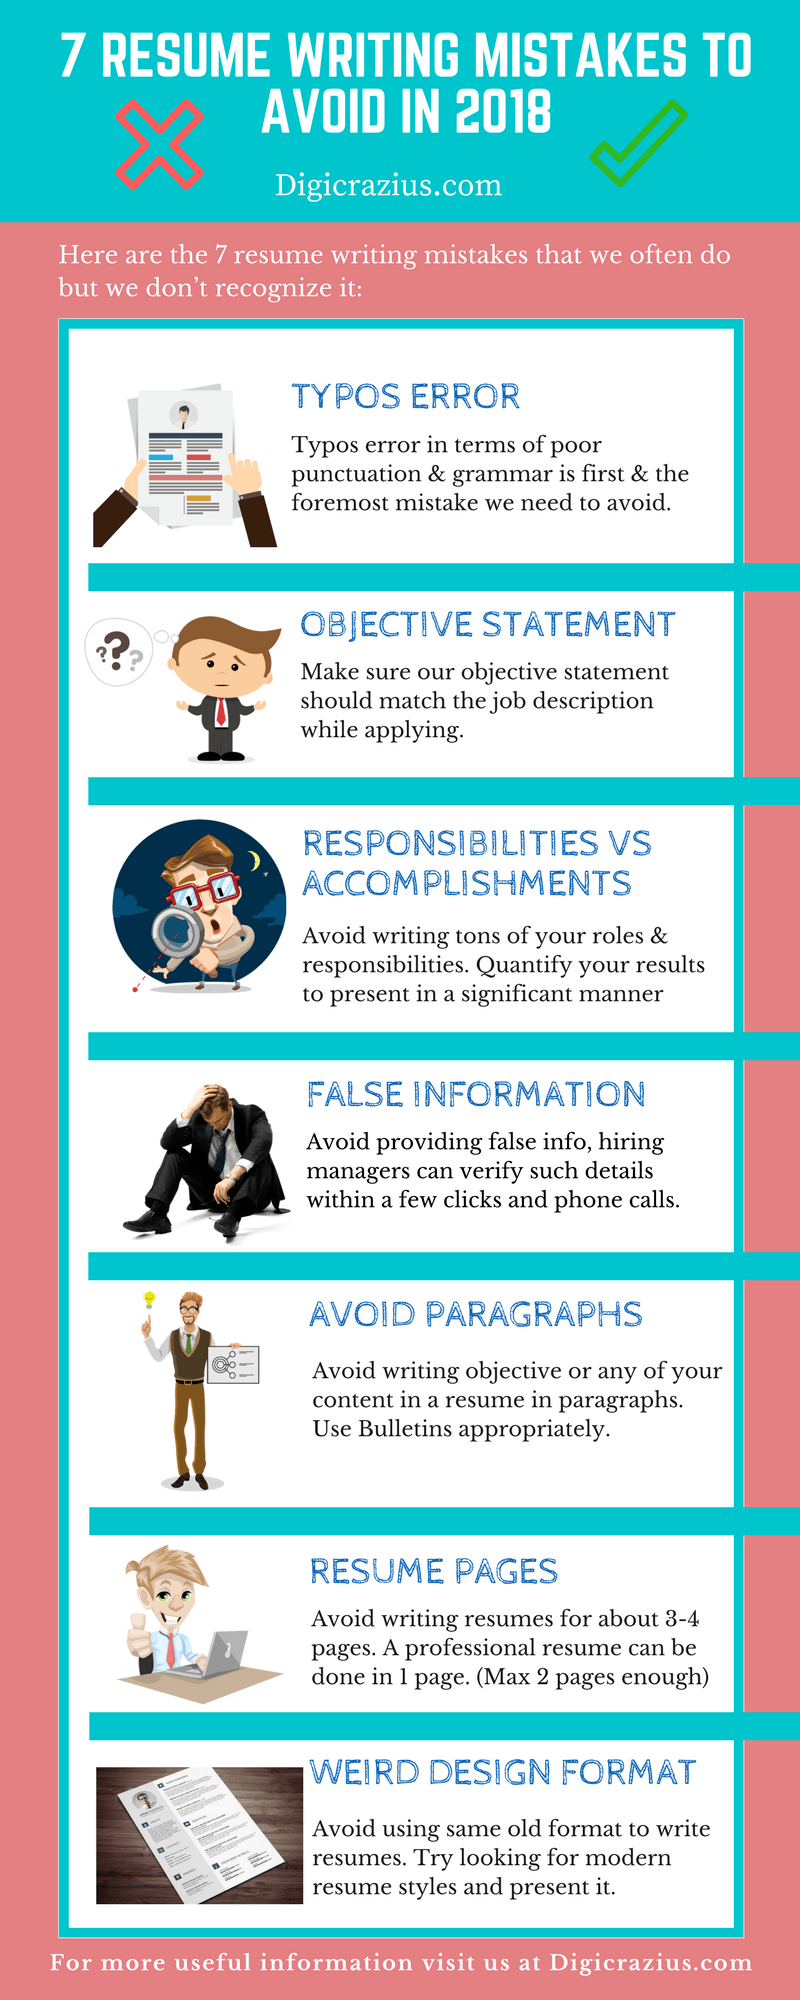 7 Resume Writing Mistakes to Avoid in 2018 Infographic